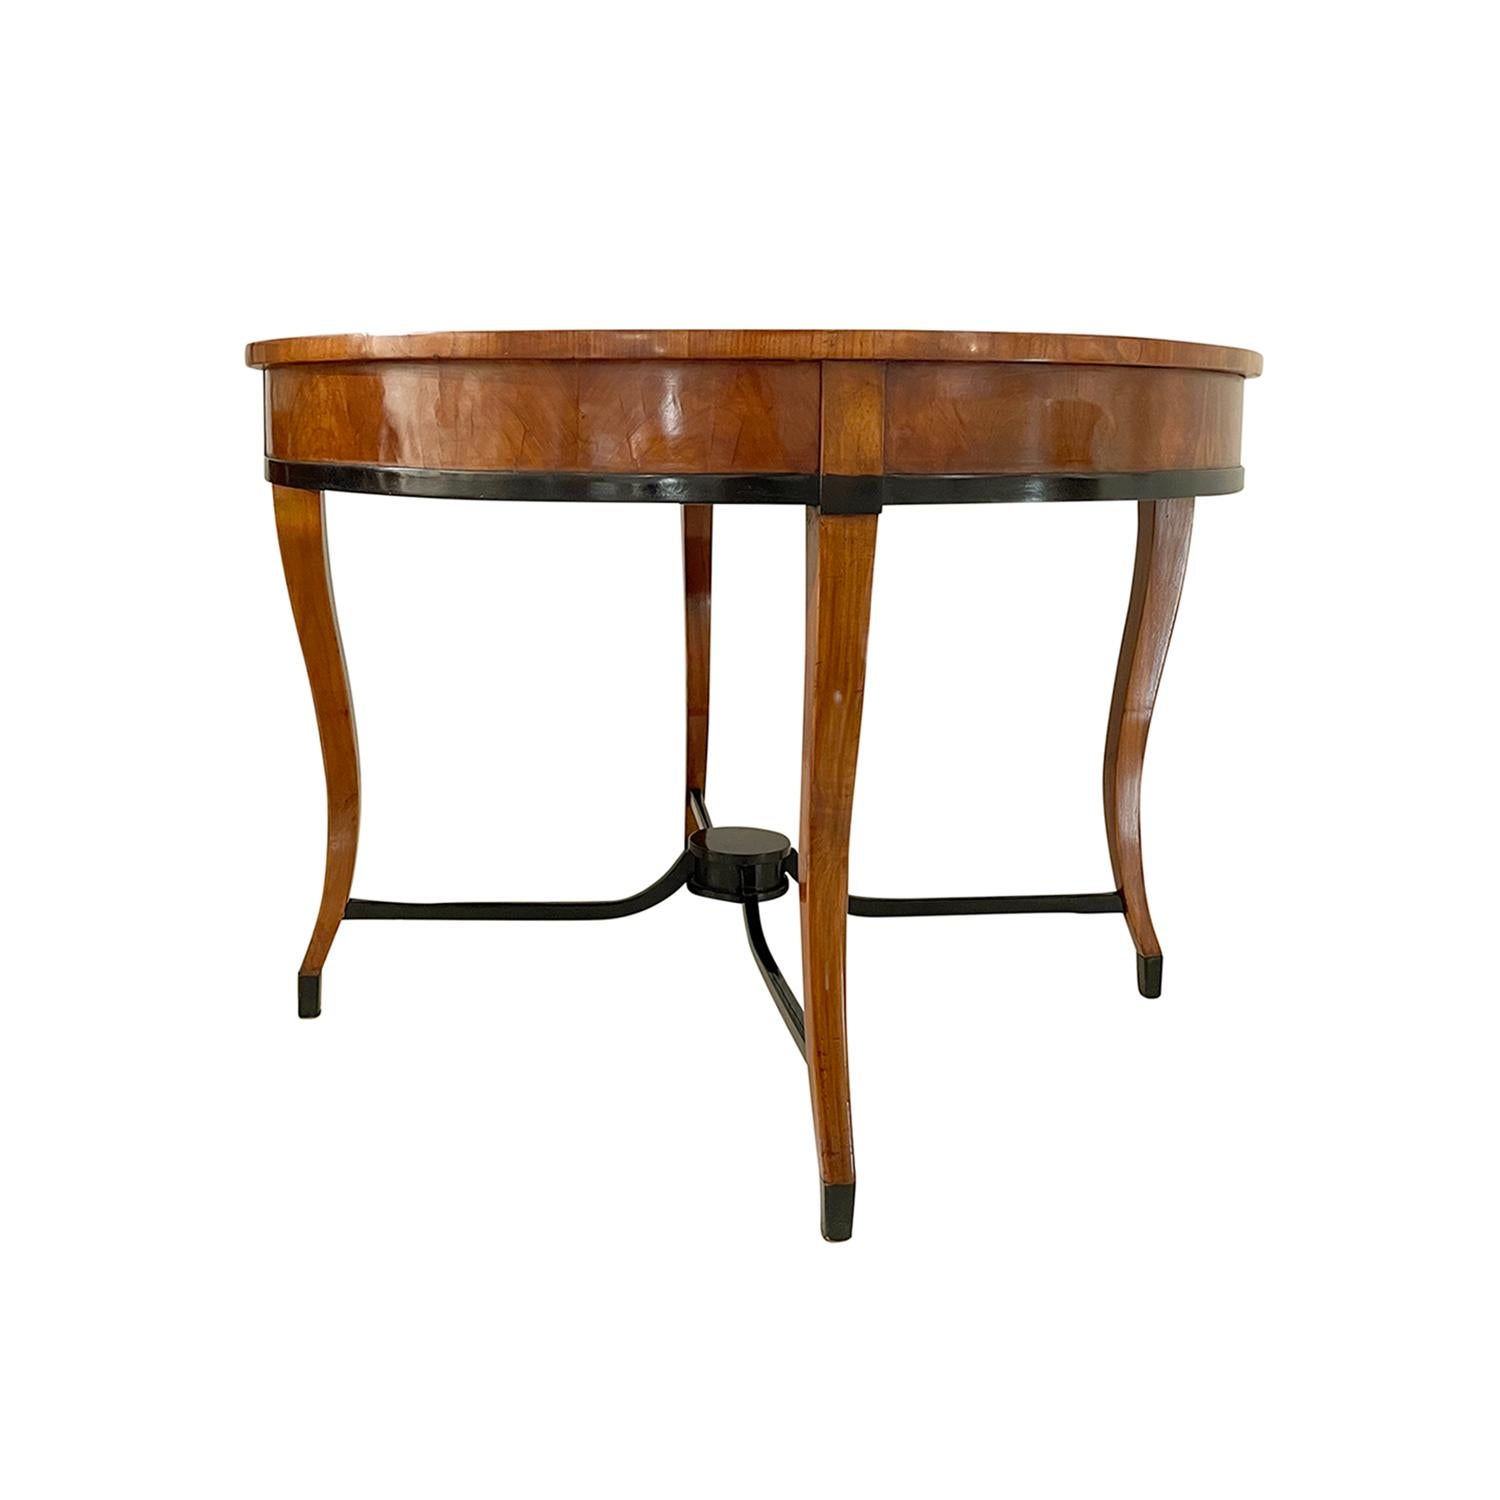 Hand-Carved 19th Century German Biedermeier Antique Round Cherrywood Dining Room Table For Sale